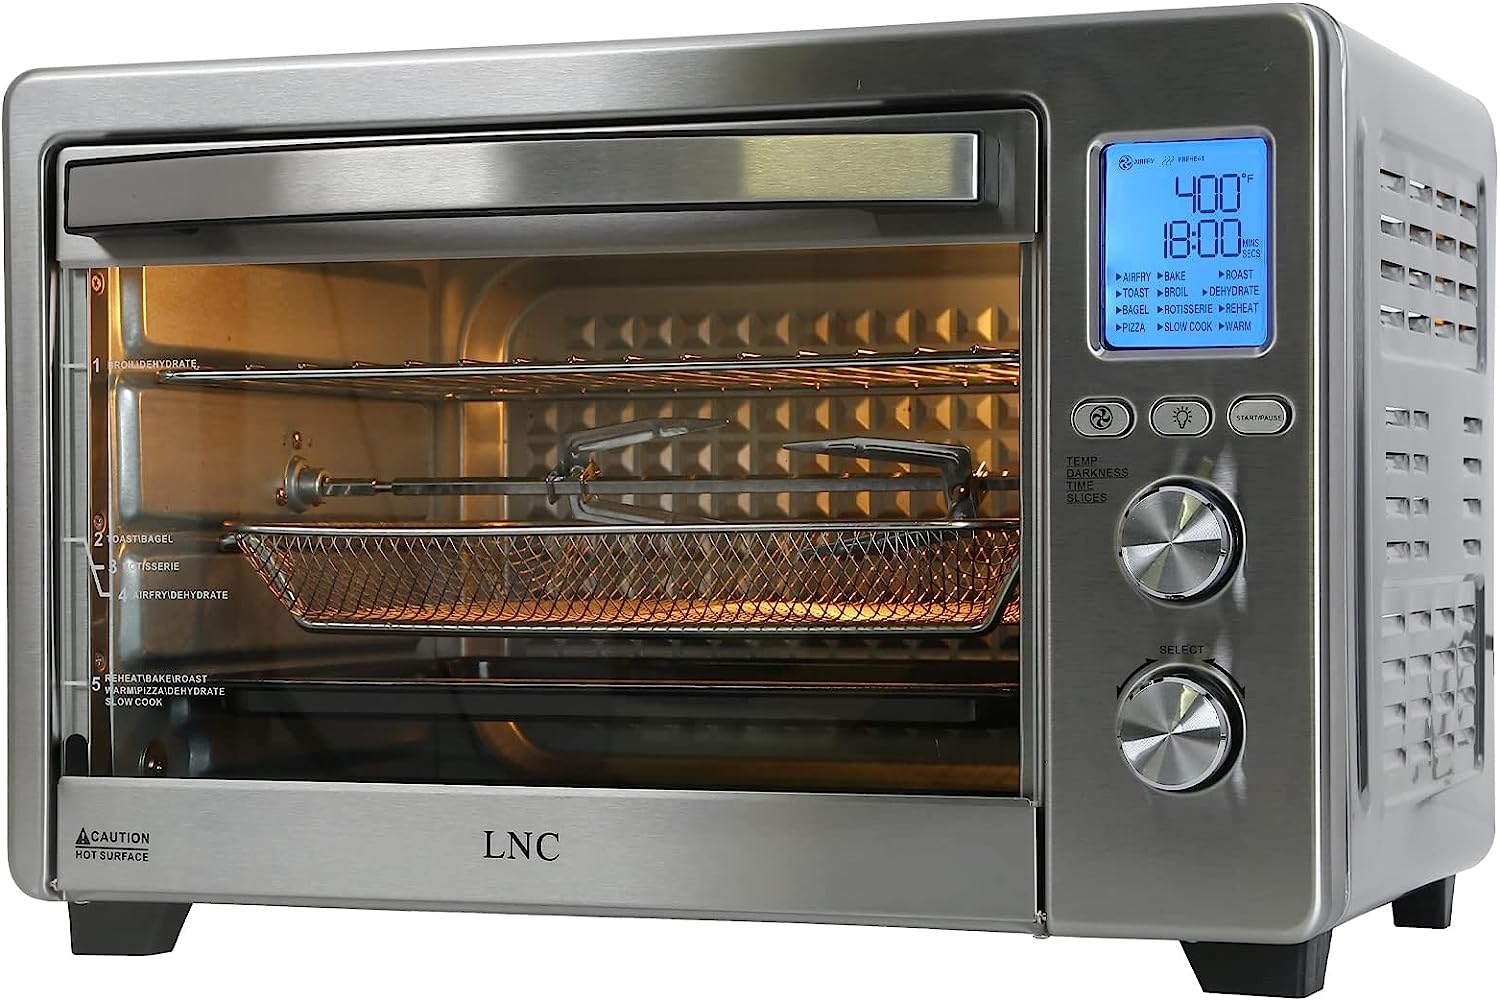 LNC Microwave Toaster Oven | DeviceDaily.com